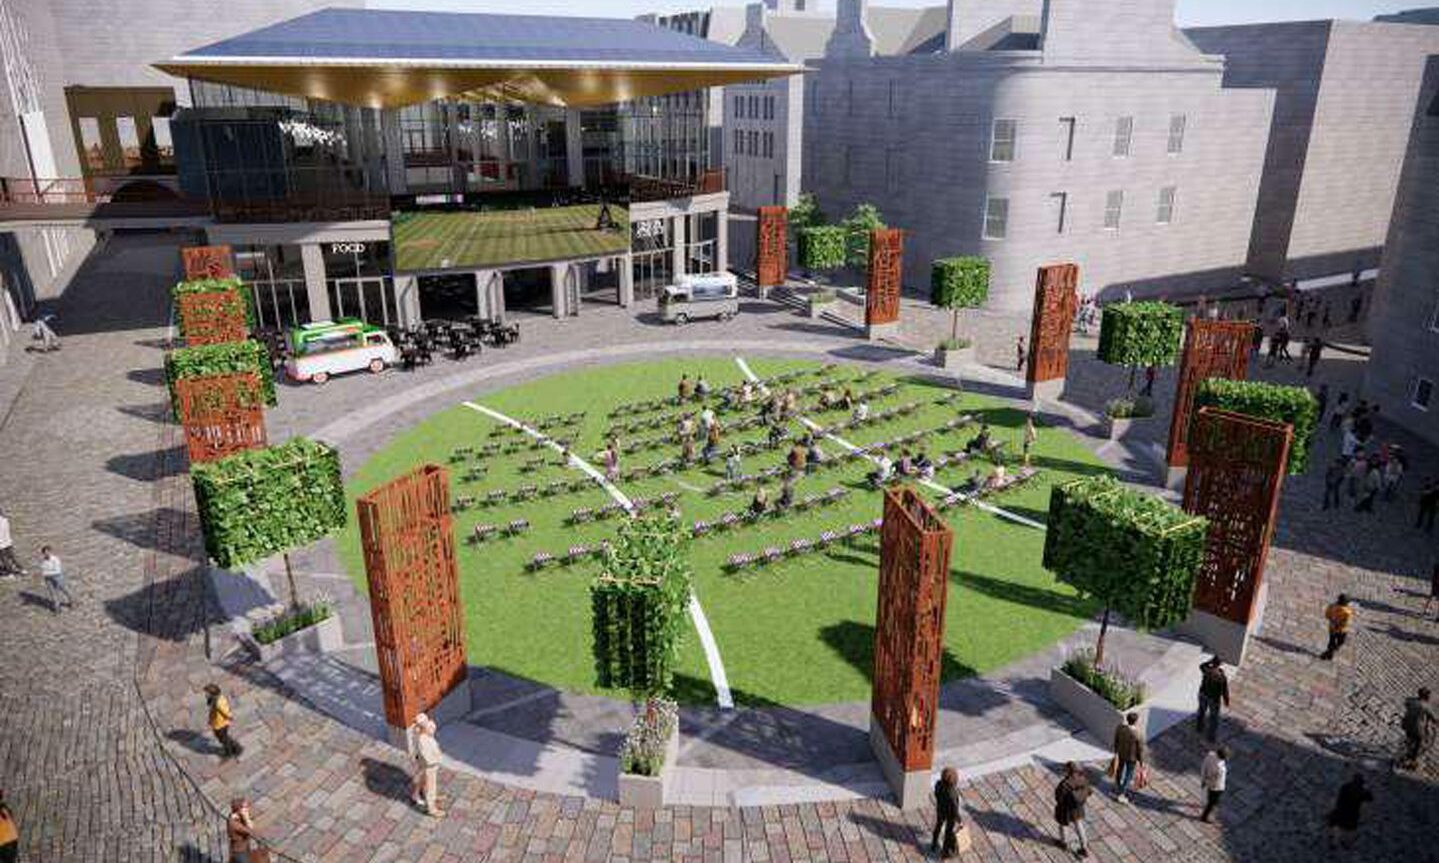 An artist's impression of a large outdoor events area at The Green, with rows of seating for event and a large temporary screen.